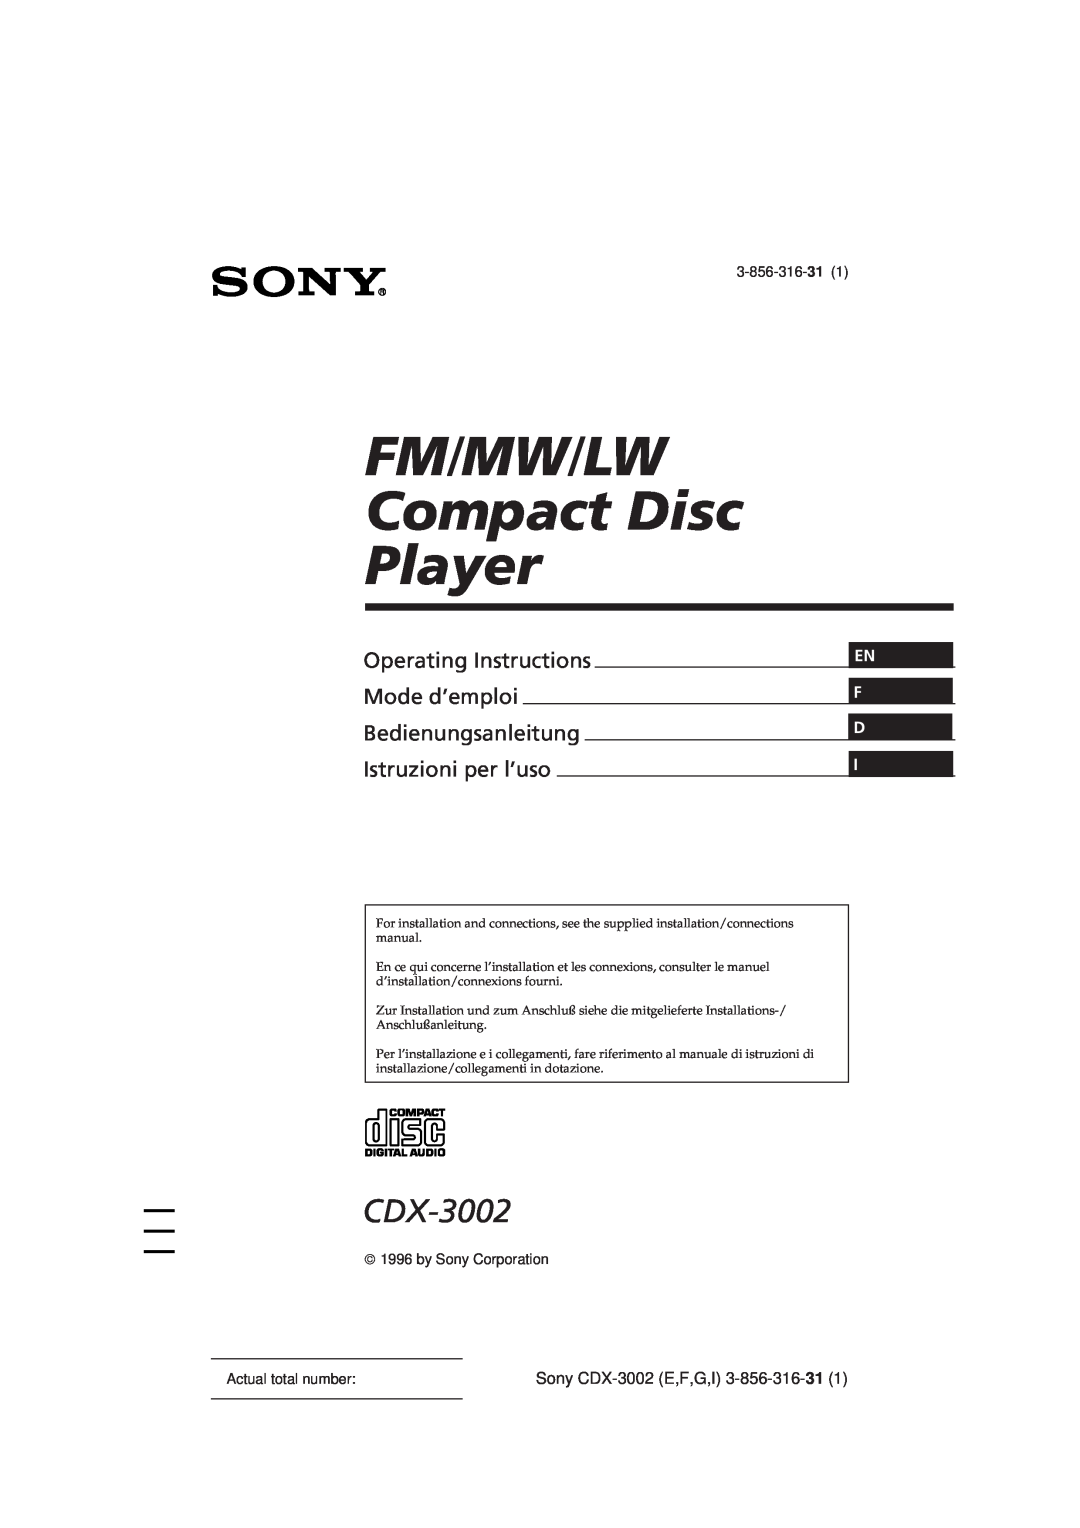 Sony CDX-3002 manual FM/MW/LW Compact Disc Player, Operating Instructions Mode d’emploi, En F D, 3-856-316-31 